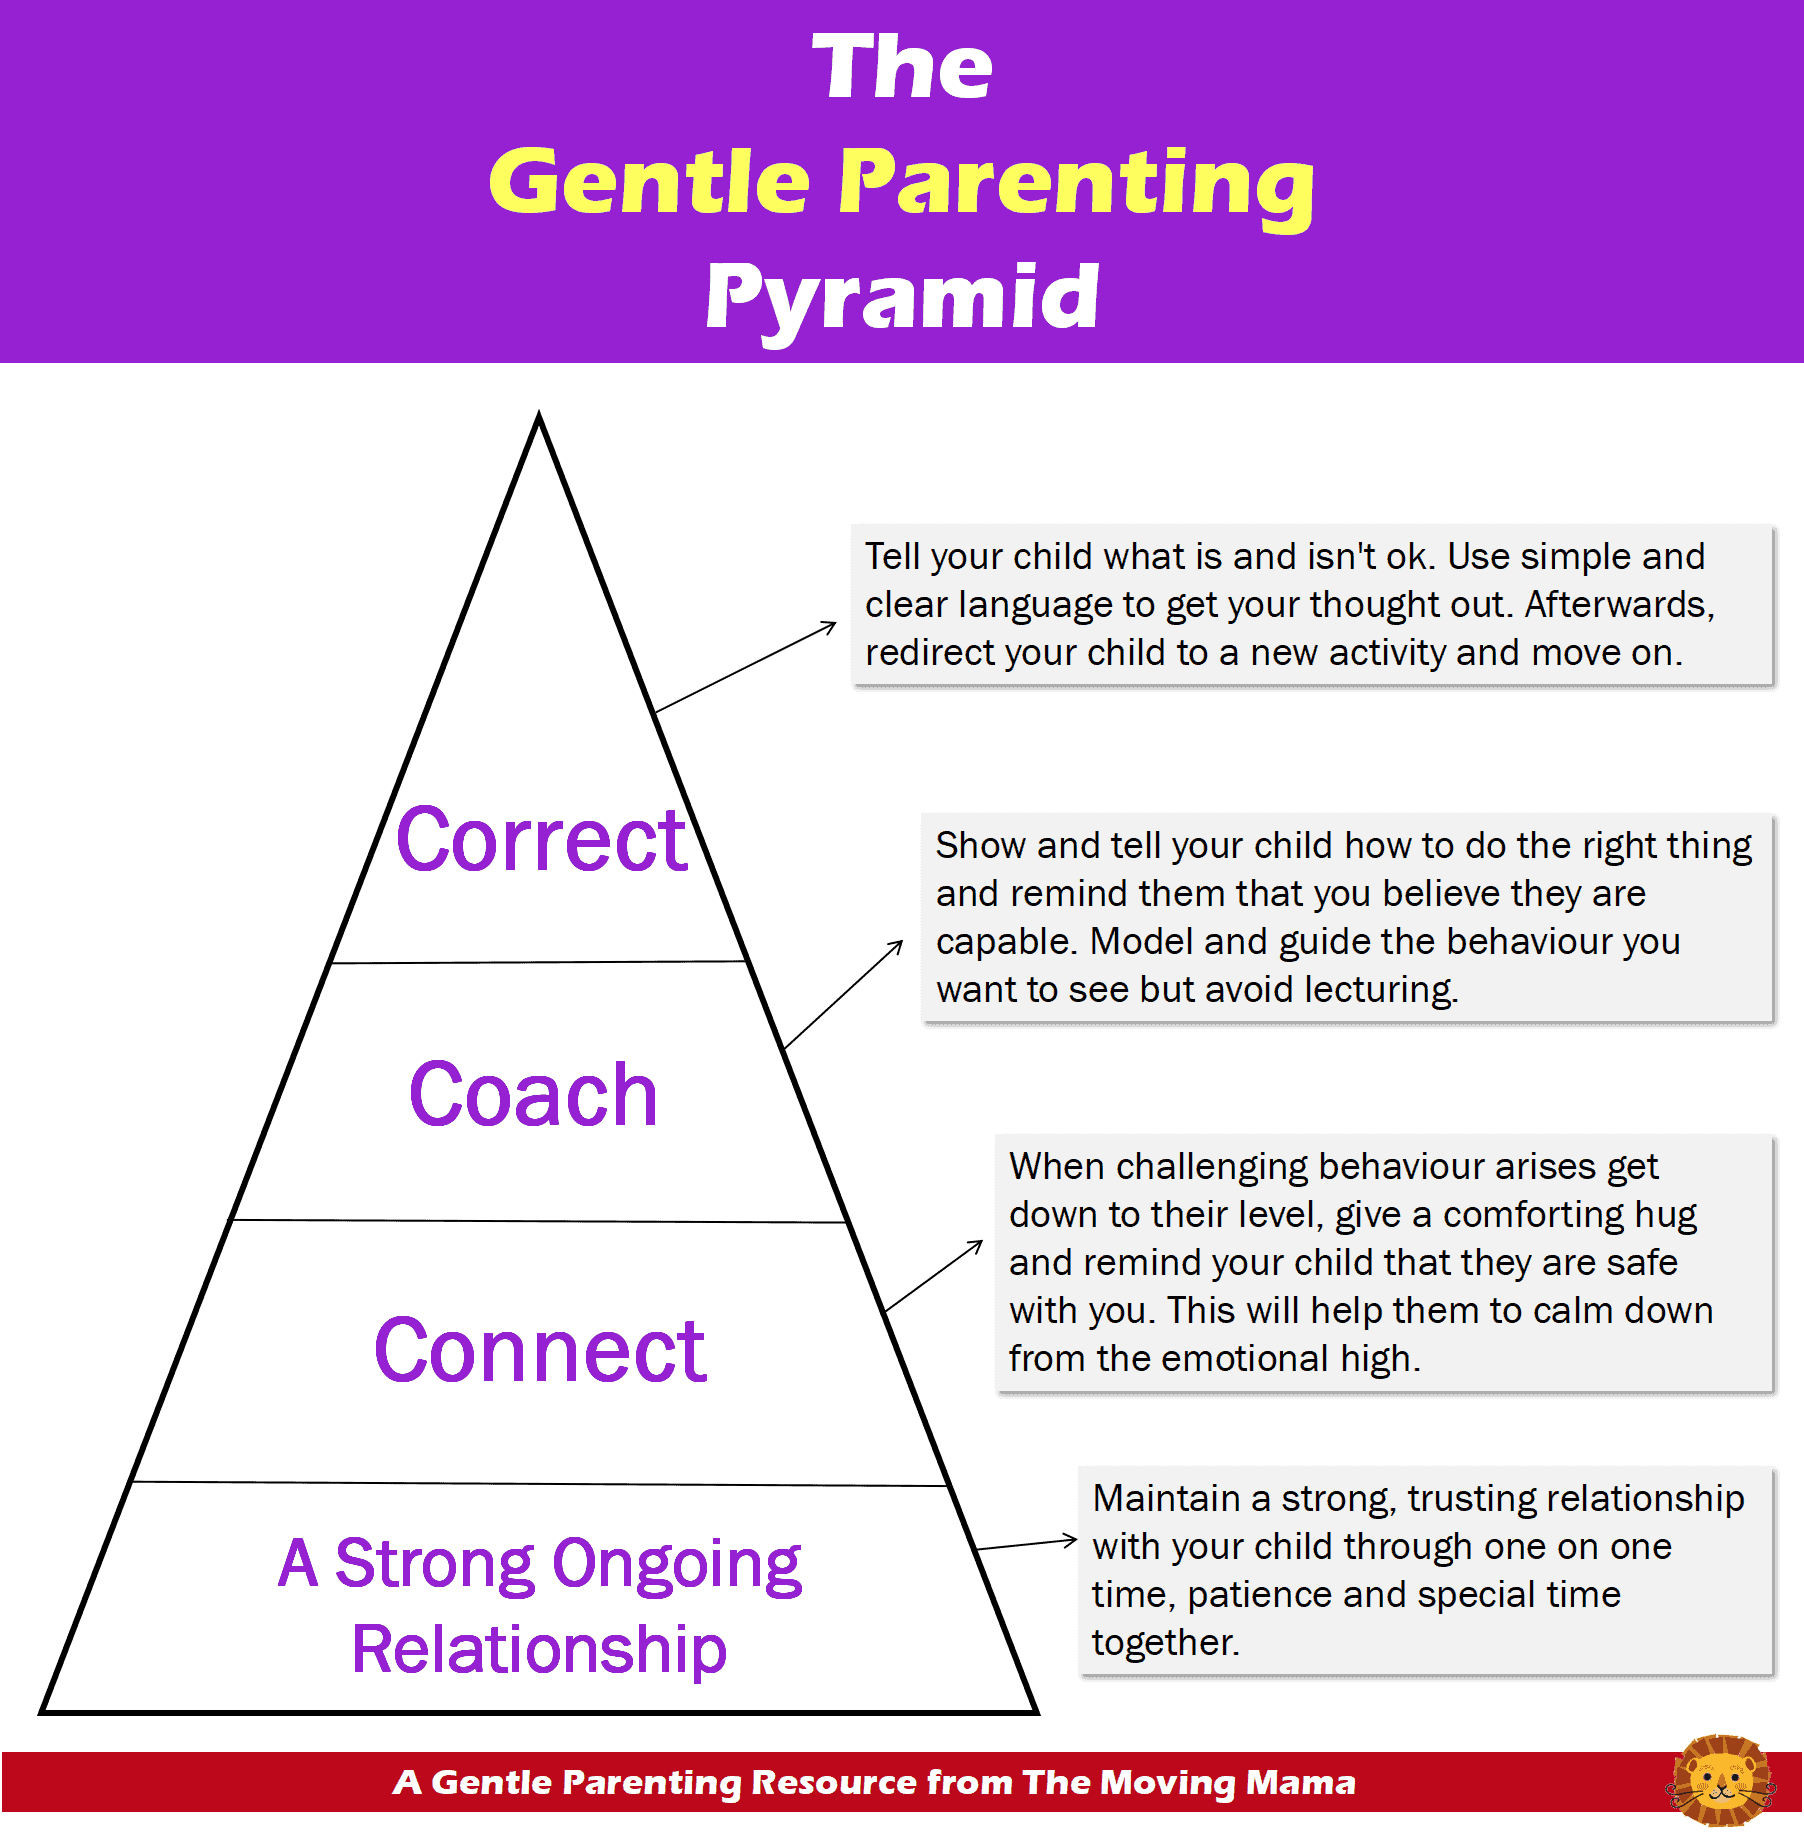 The gentle parenting pyramid - from bottom to top - an ongoing relationship, connect, coach and finally correct